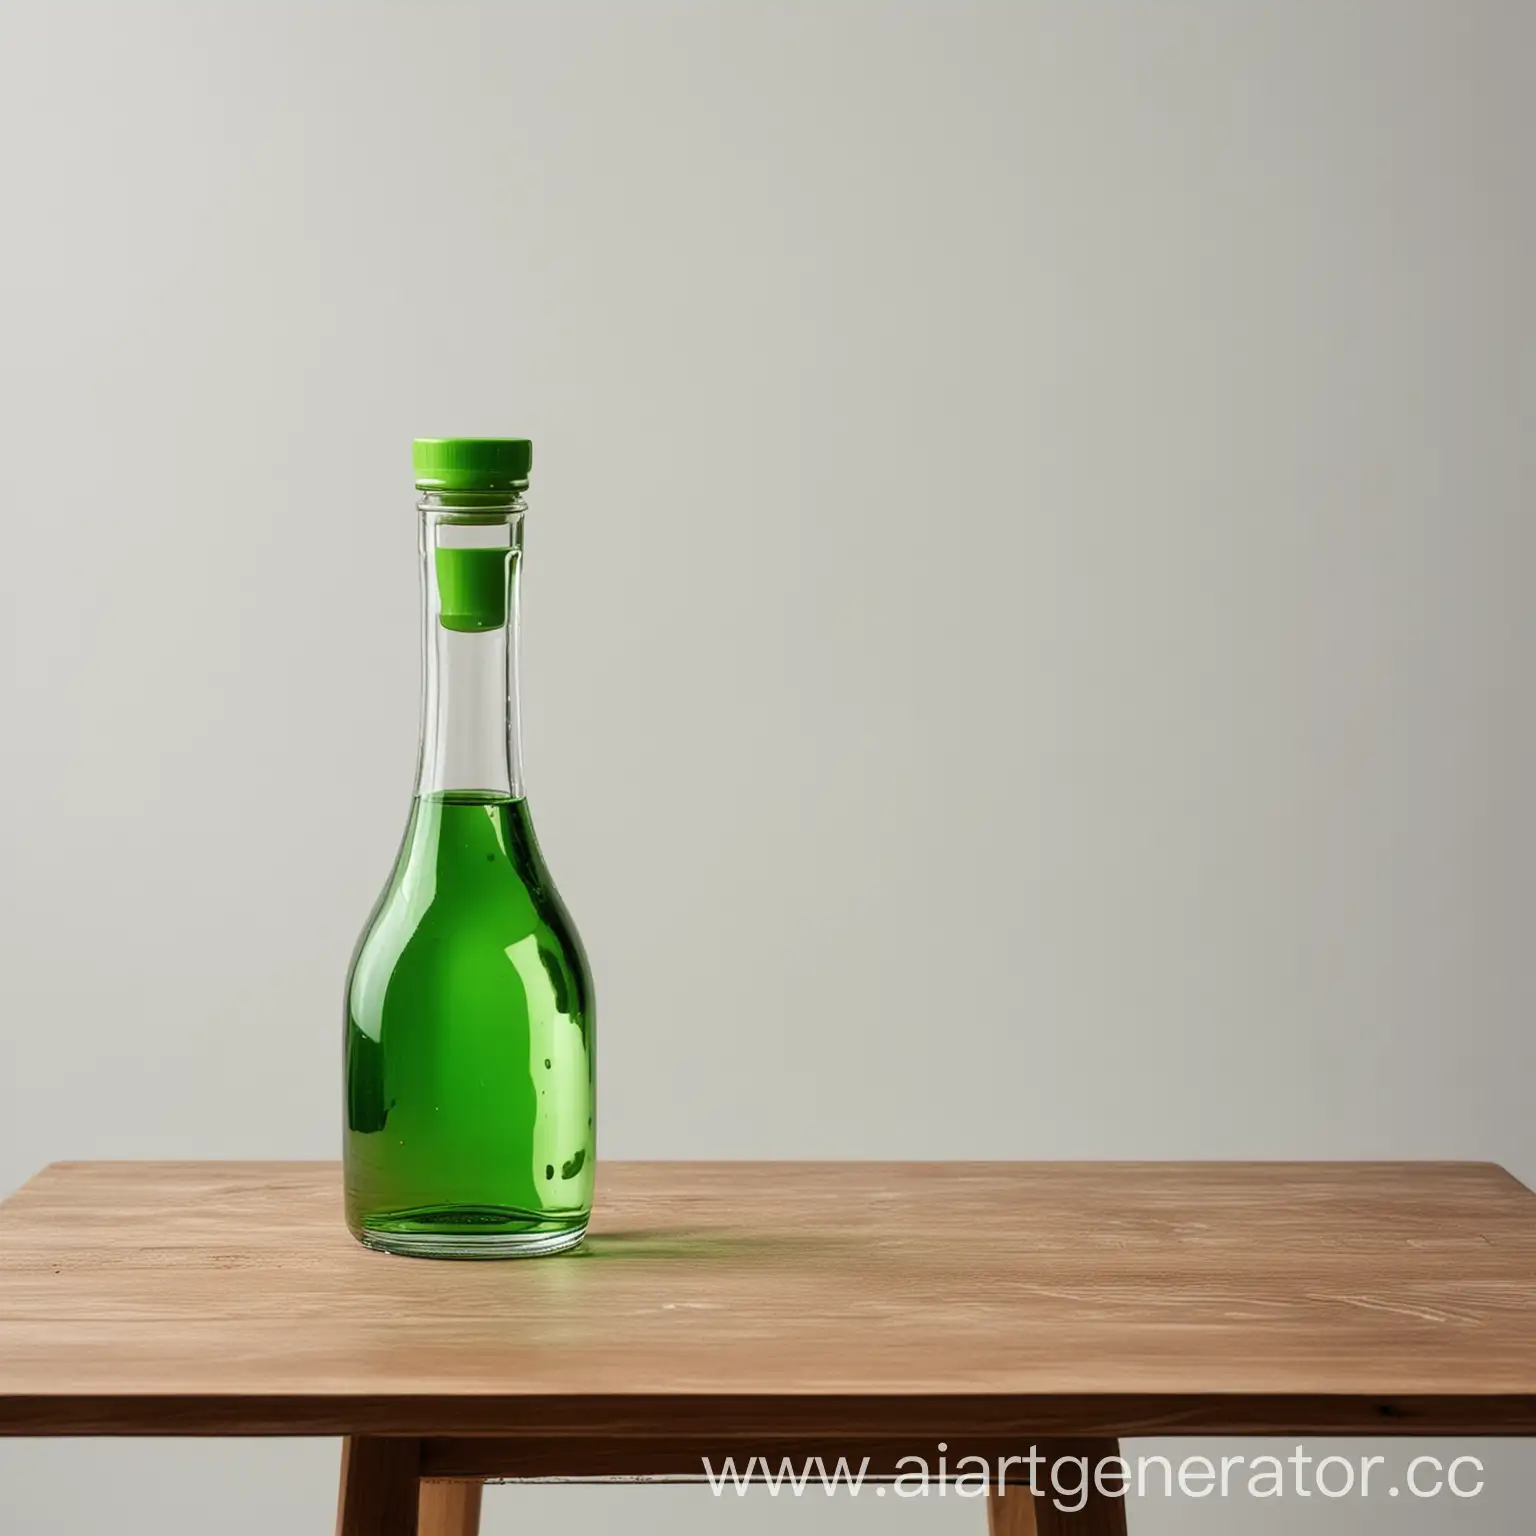 Designer-Glass-Bottle-with-Bright-Green-Liquid-on-White-Table-Background